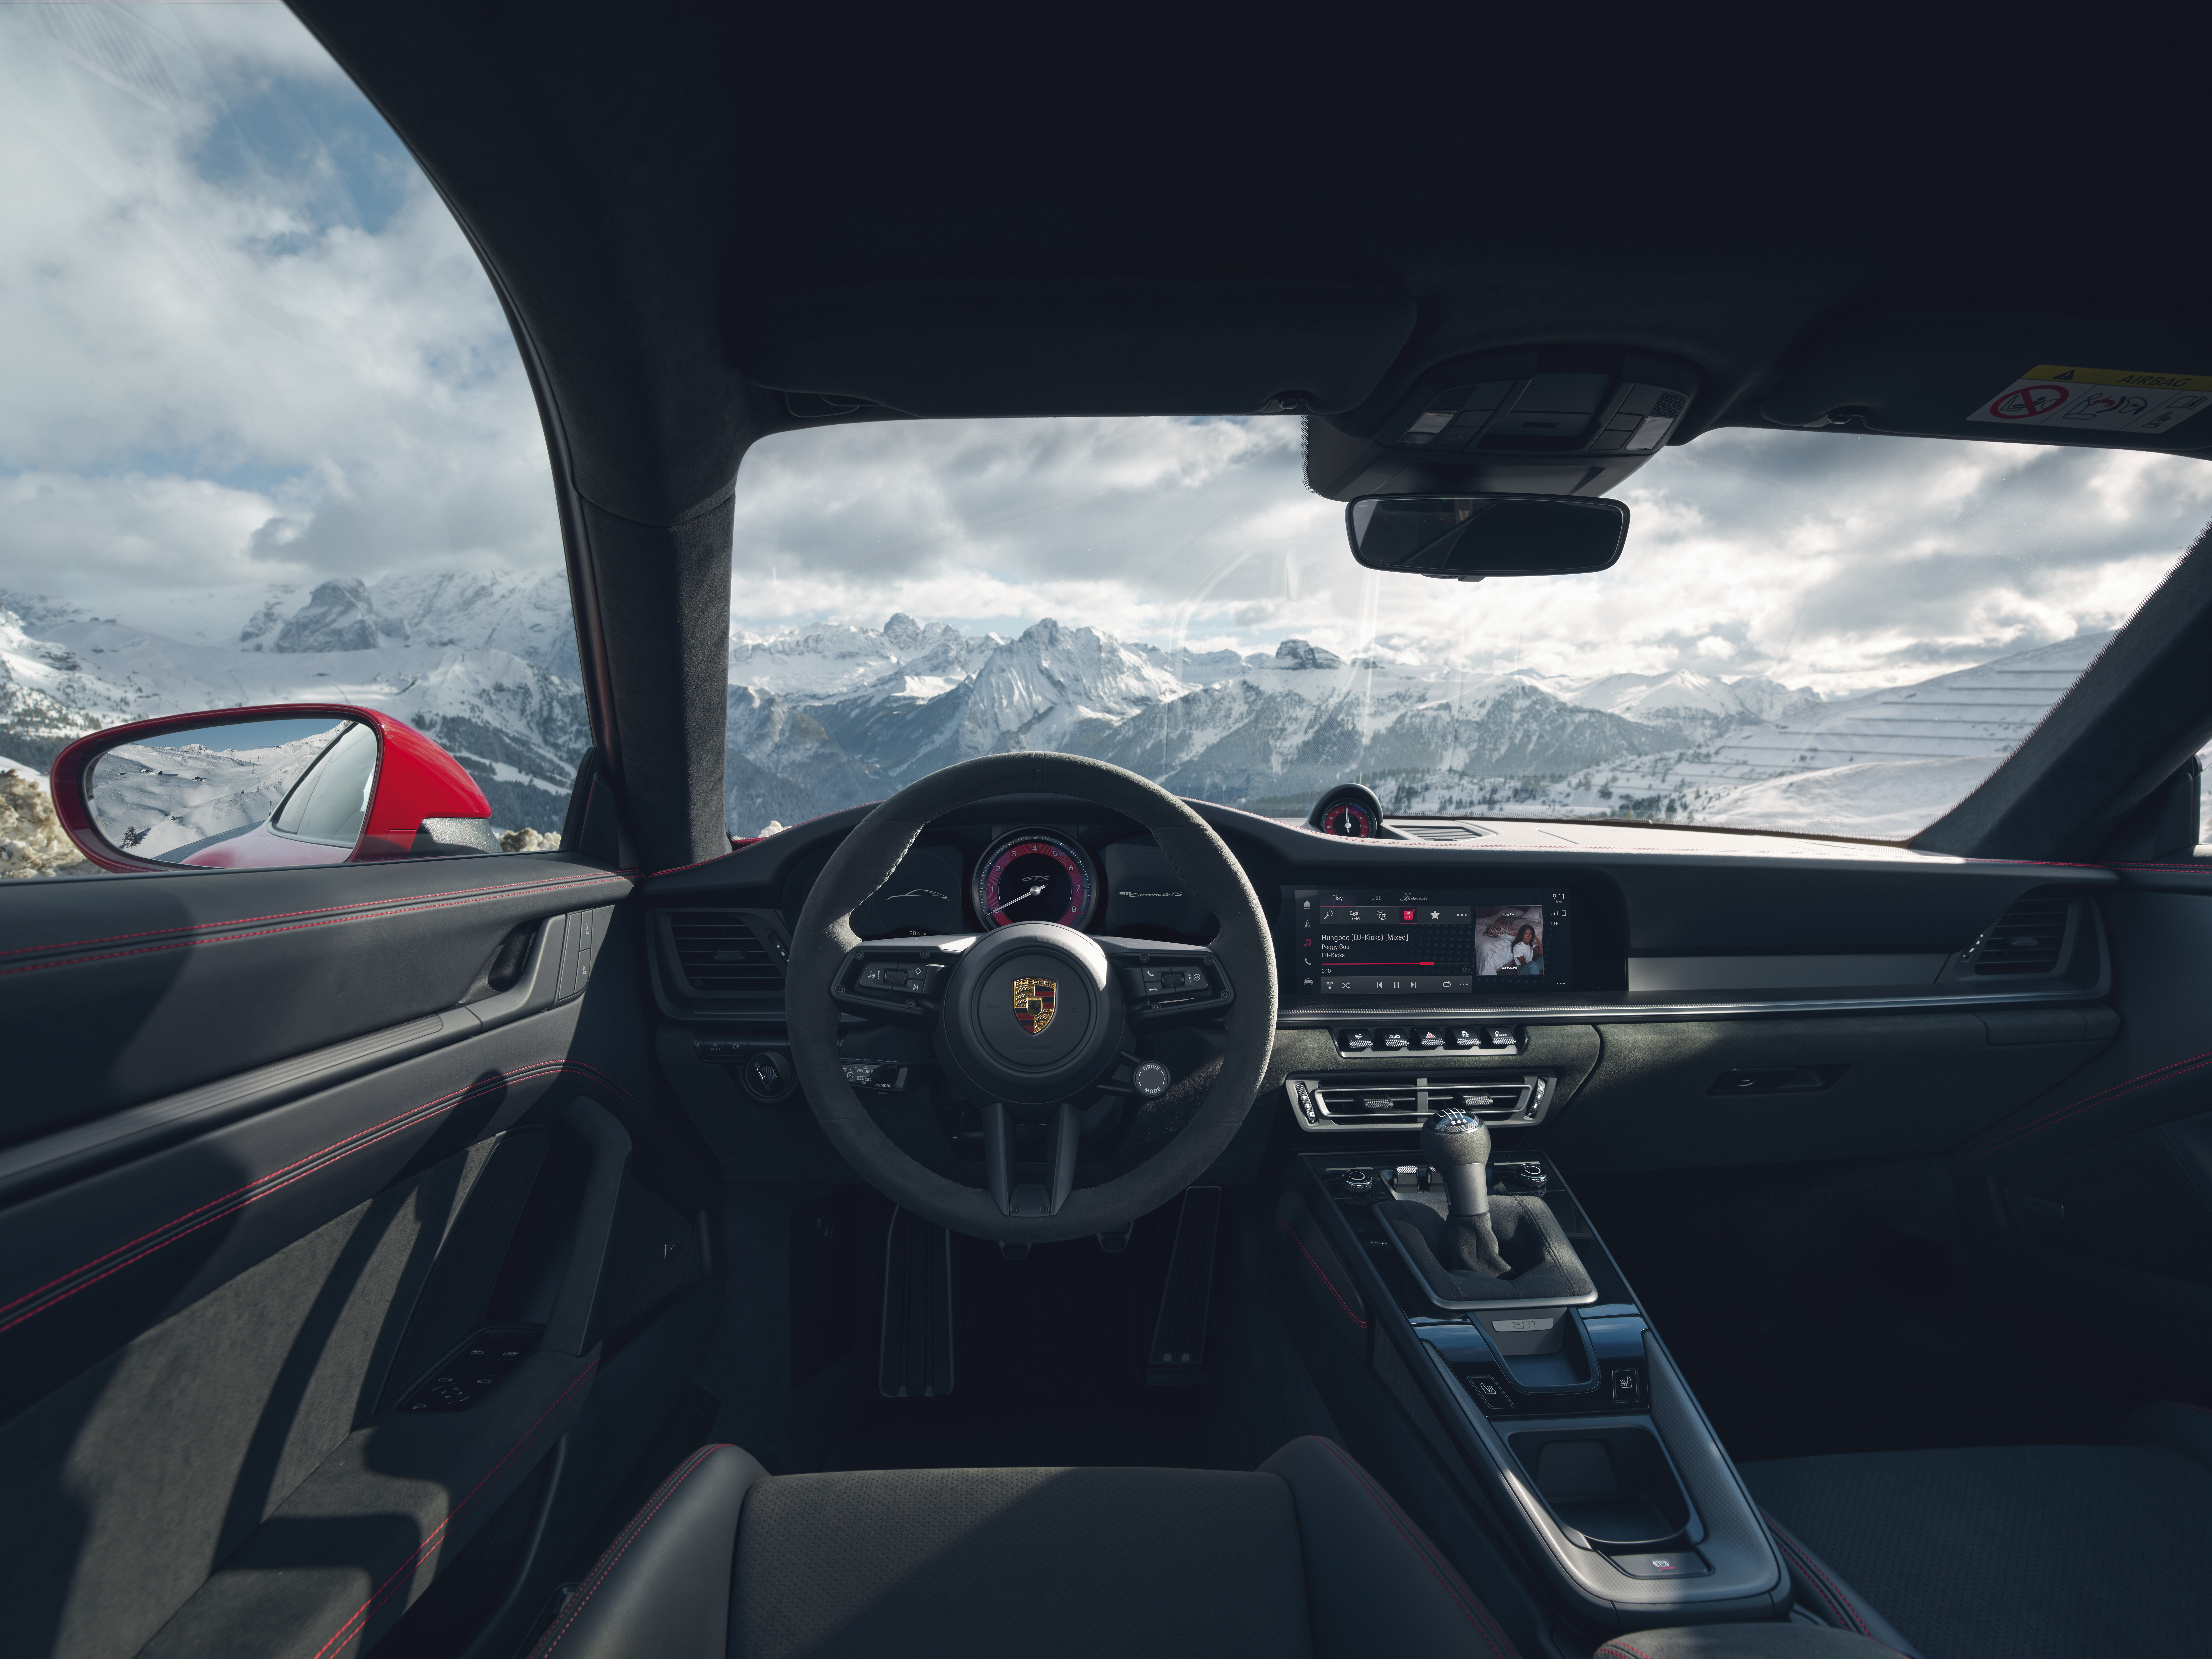 View from driver seat of Porsche 911 GTS out onto mountains